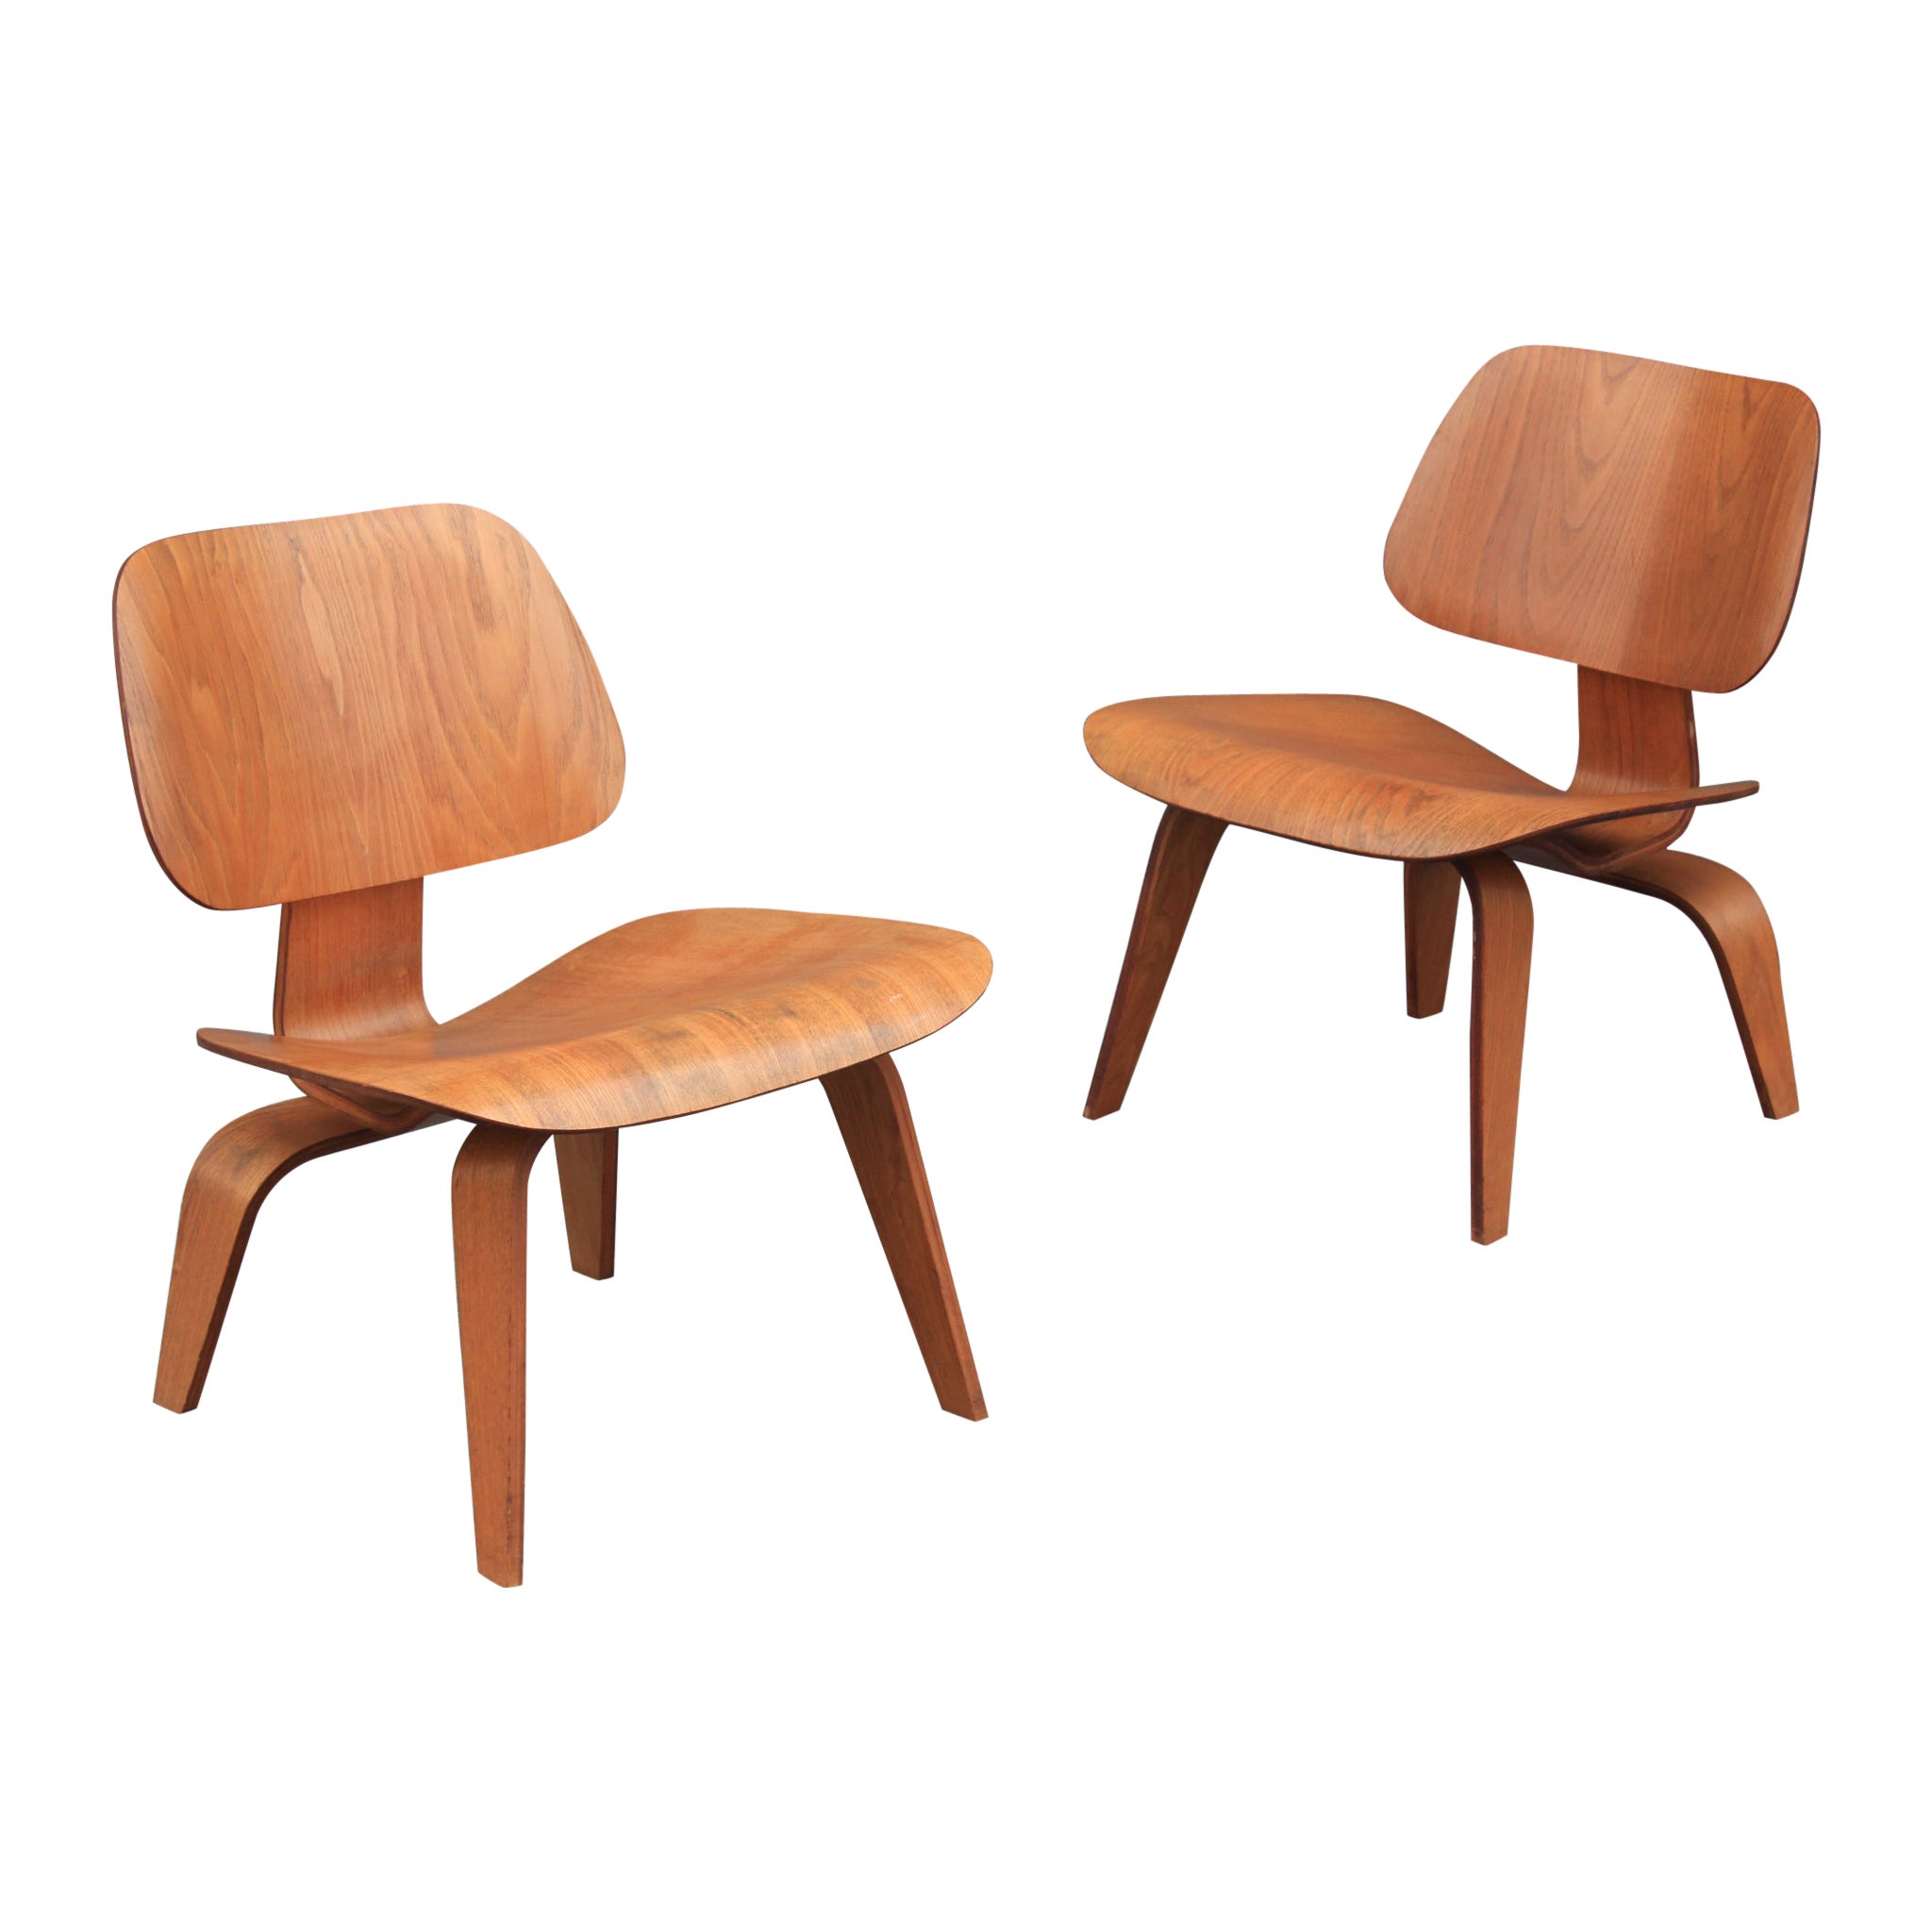 1940s Pair of Early Charles Eames for Herman Miller LCW Lounge Chairs in Oak For Sale